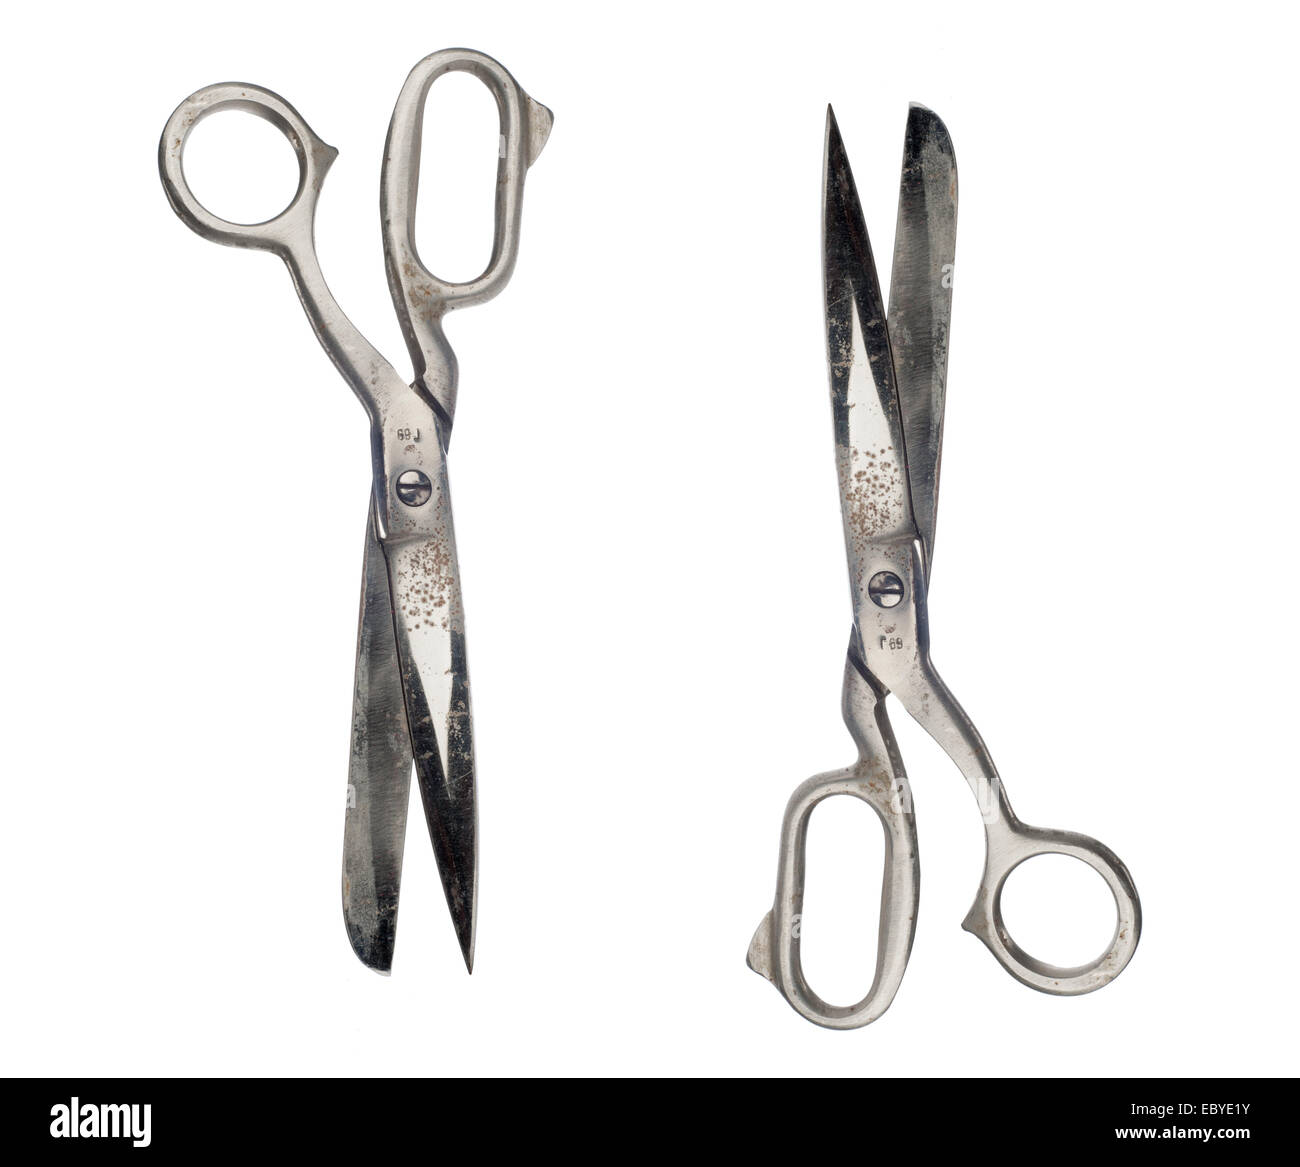 Large dressmaking or tailoring scissors, isolated Stock Photo